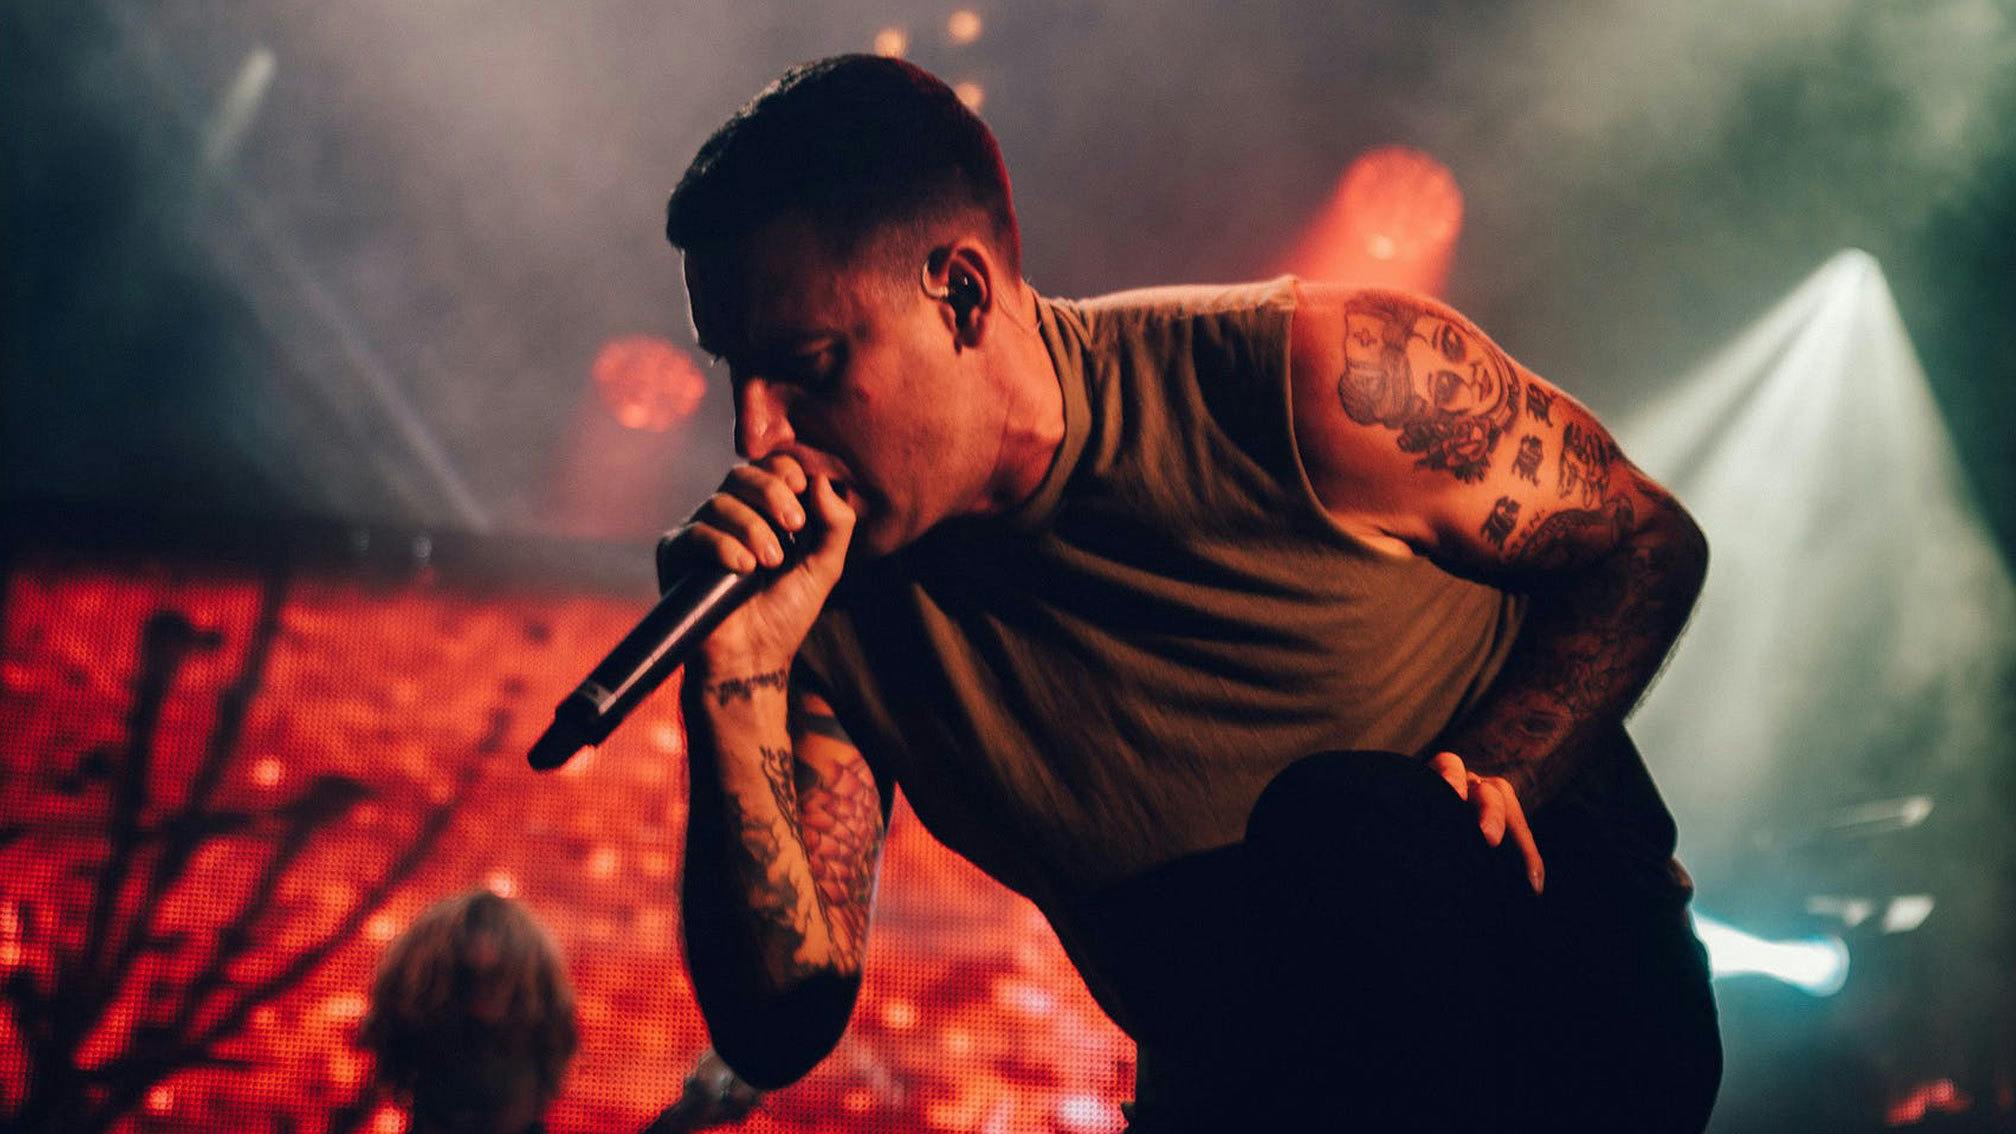 Parkway Drive announce U.S. tour with Hatebreed, Black Dahlia Murder and Stick To Your Guns